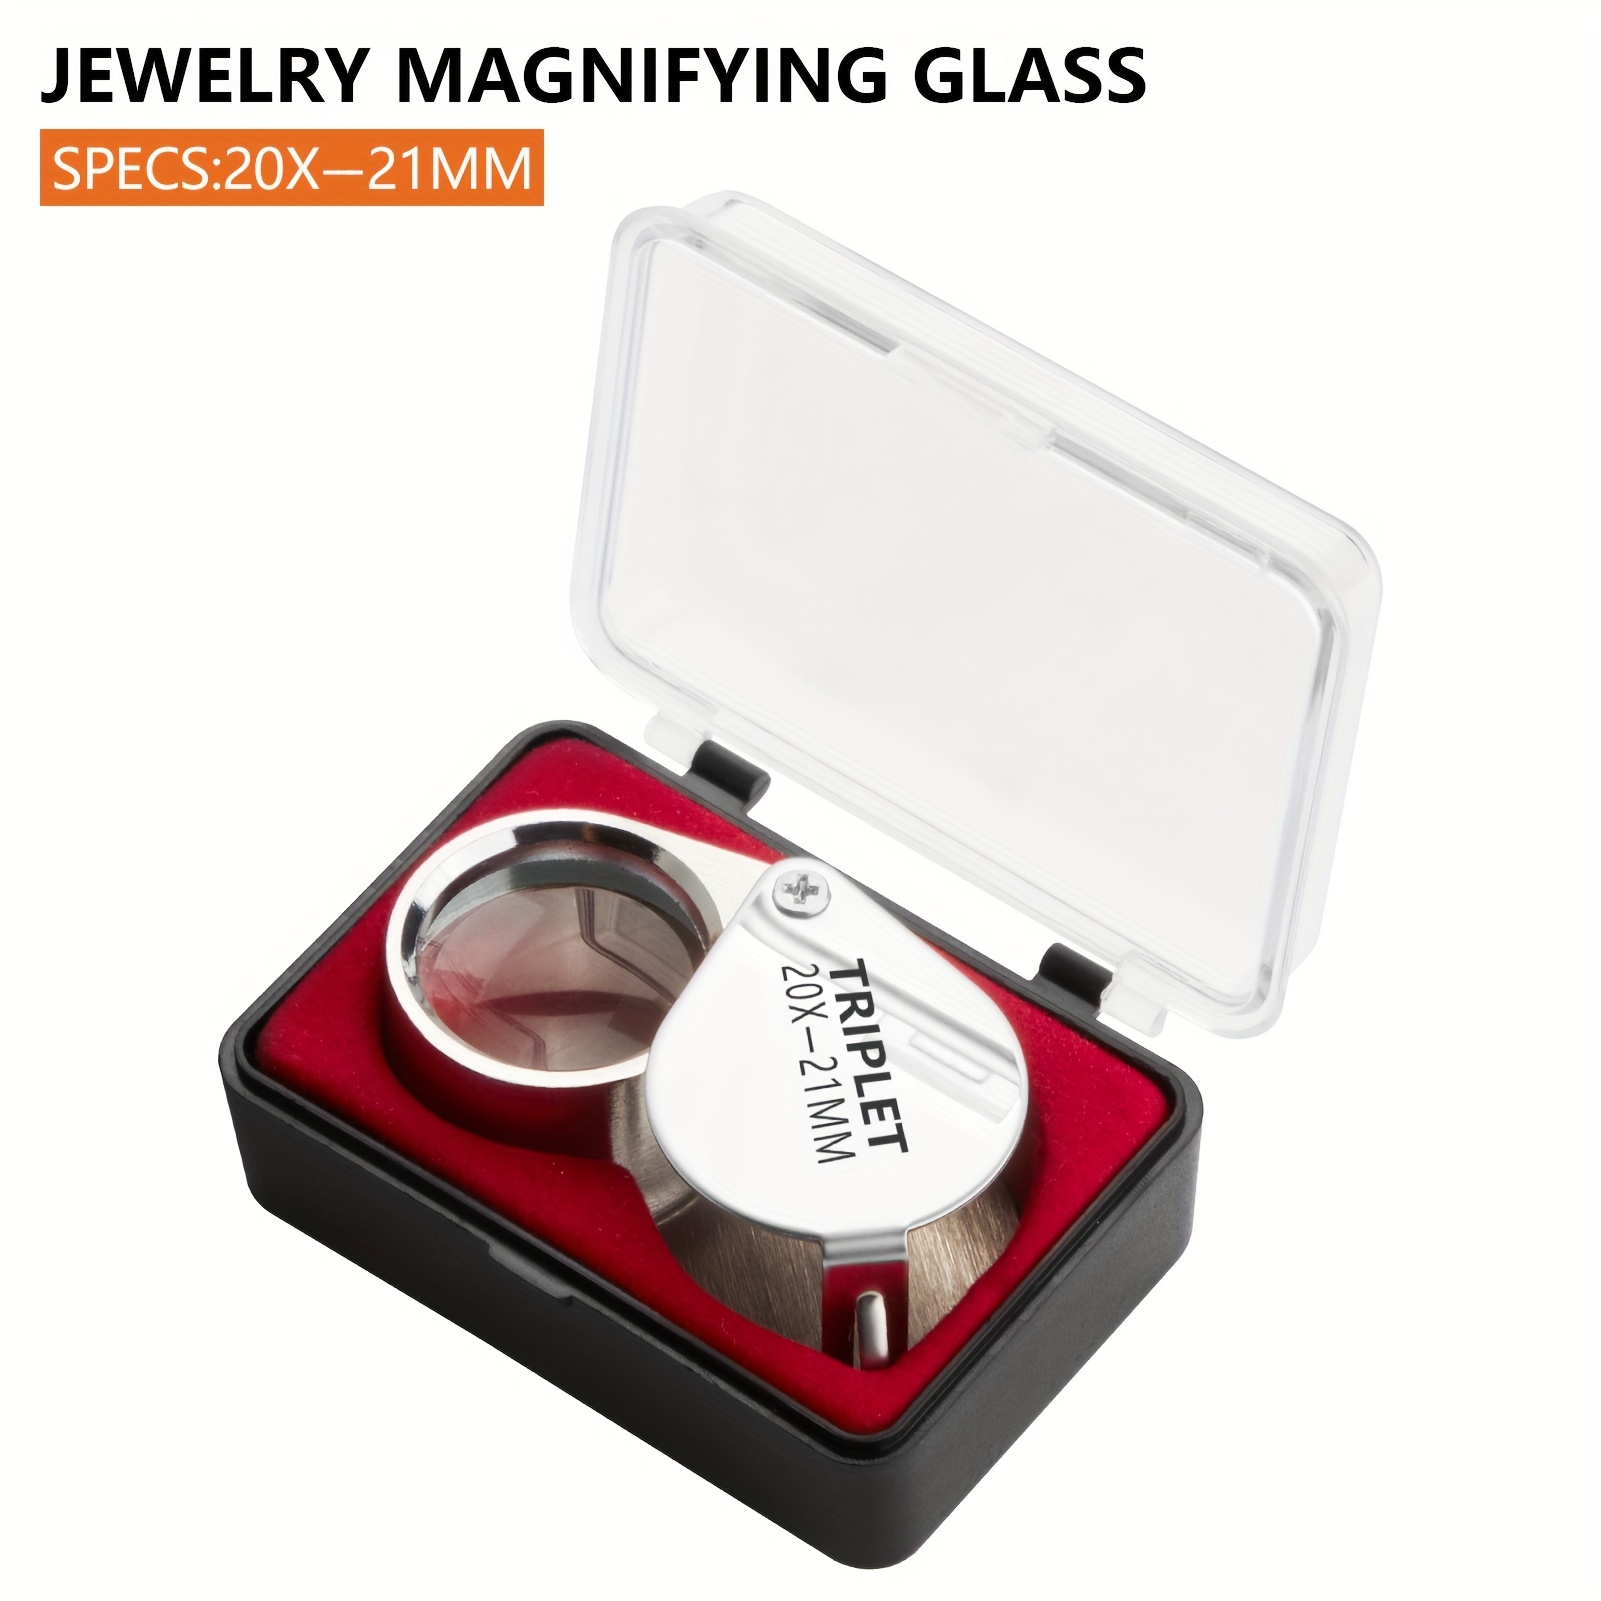 Mini Folding Magnifier 30x 21mm Jewelers Eye Magnifying Glass Magnifier  Pocket Handheld Tools Portable Magnifying Glass